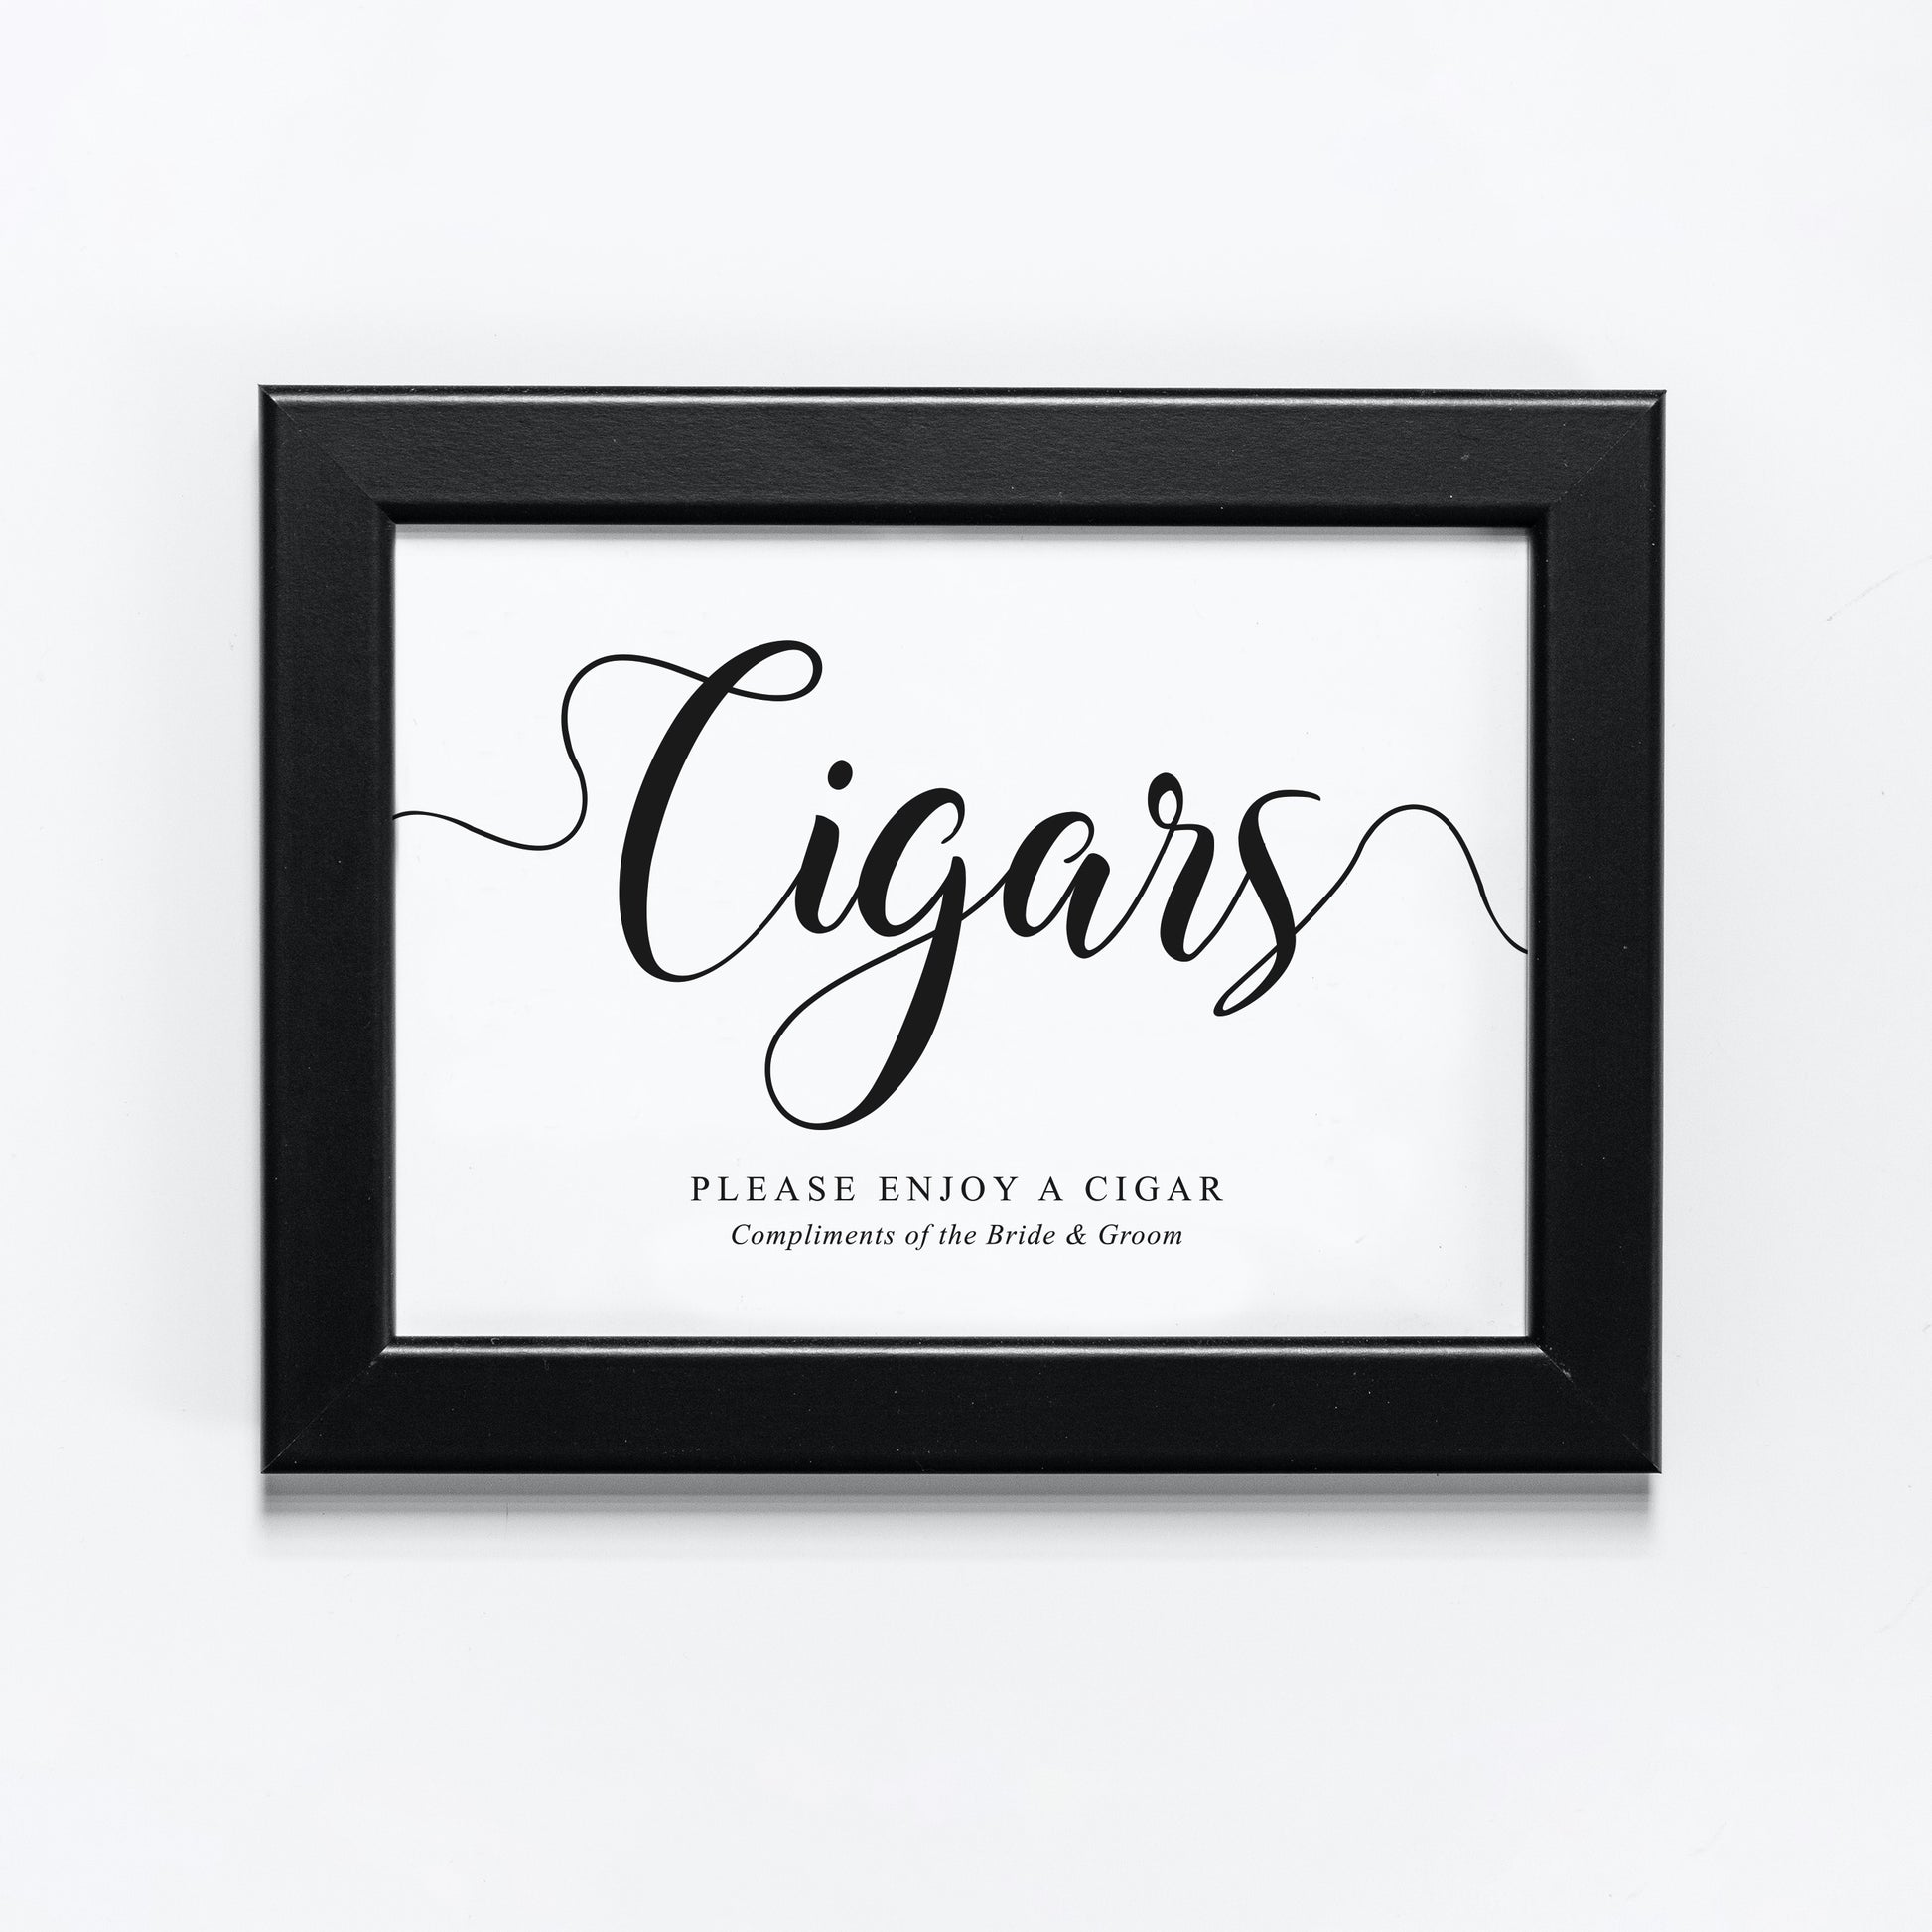 Complimentary cigars sign digital download